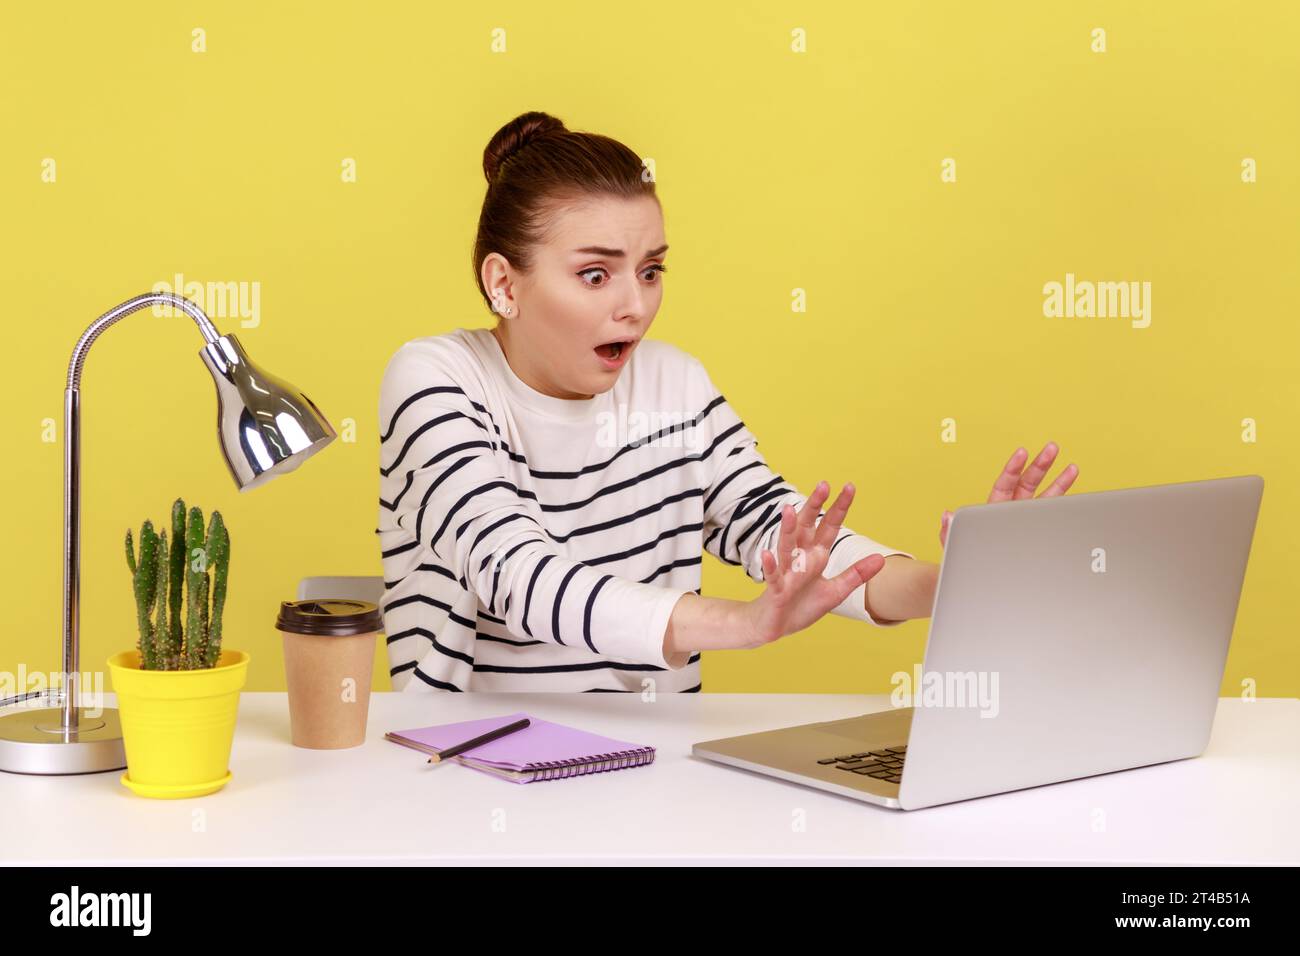 Frightened woman with shocked expression raising hands in stop gesture, defending herself, working on laptop, sees prohibited content. Indoor studio studio shot isolated on yellow background. Stock Photo